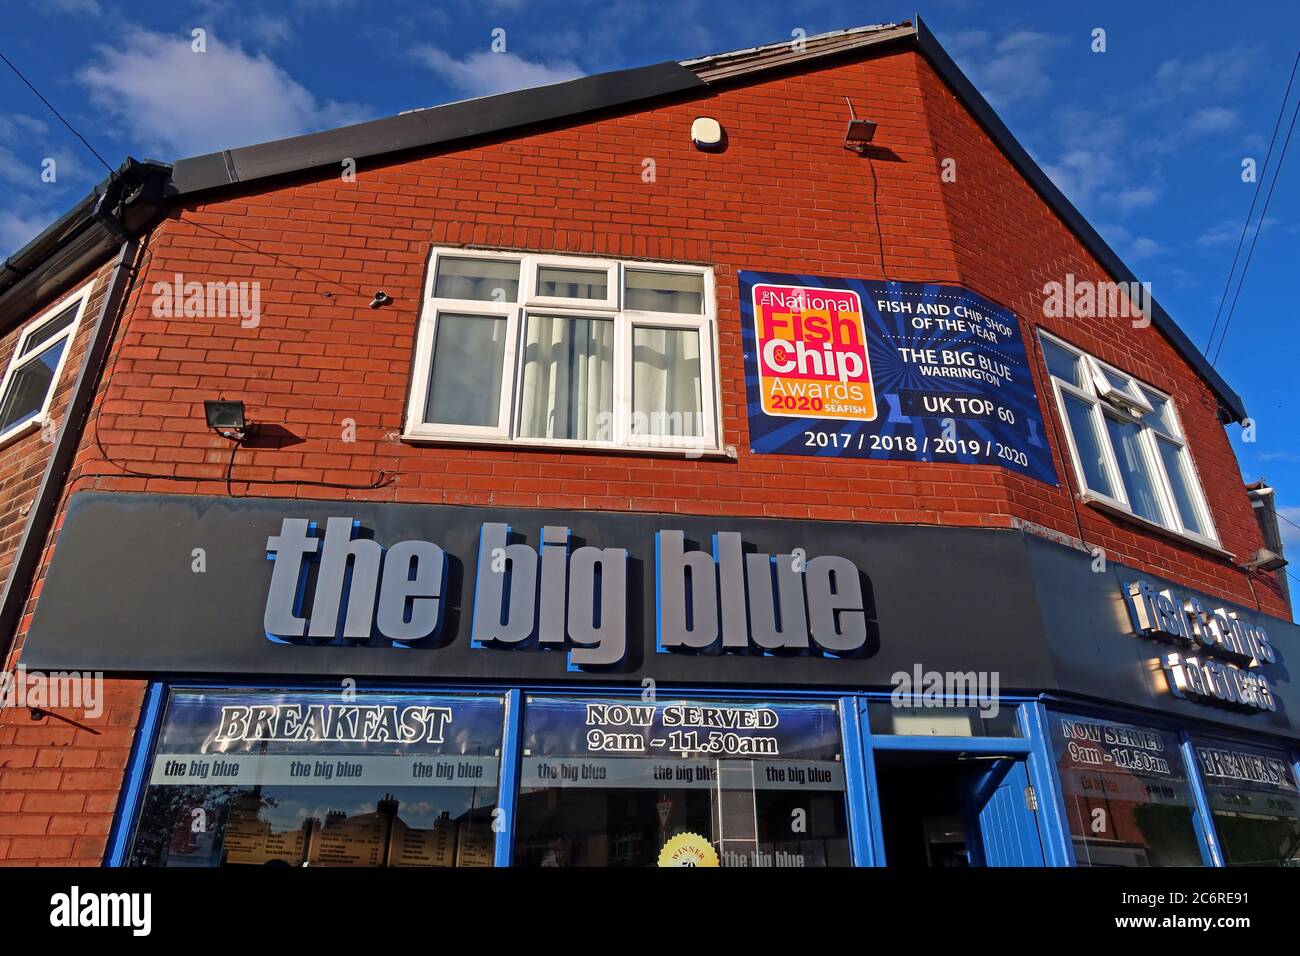 The Big Blue, Fish and Chip Shop, 177 Knutsford Rd, Grappenhall, Warrington, Cheshire, Angleterre, Royaume-Uni, WA4 2QL Banque D'Images